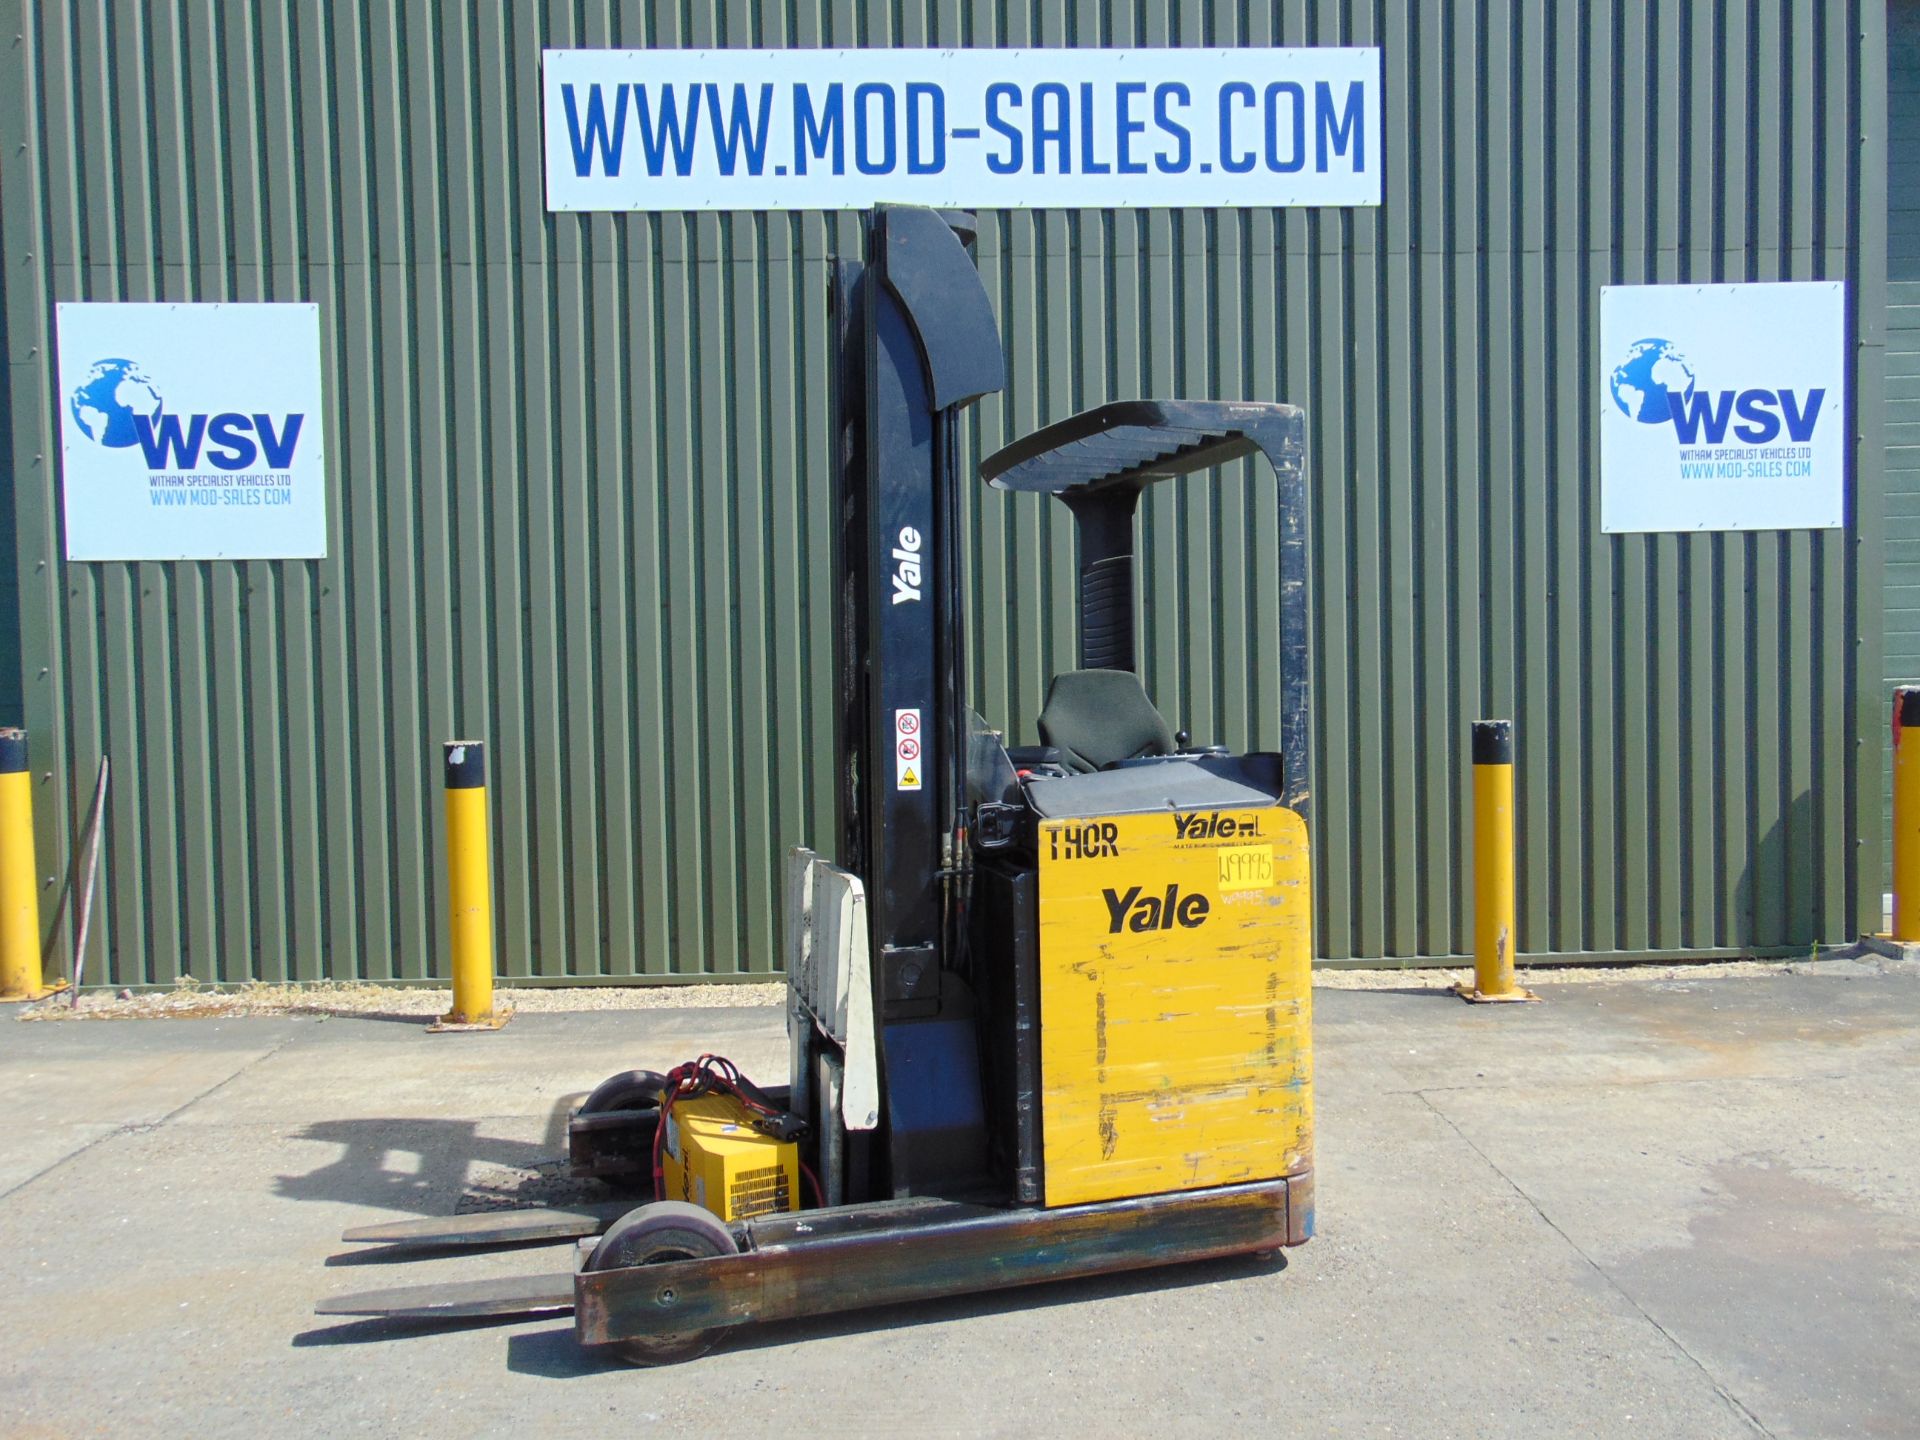 Yale MR16 Electric Reach Fork Lift Truck c/w Battery Charger ONLY 726 HOURS!